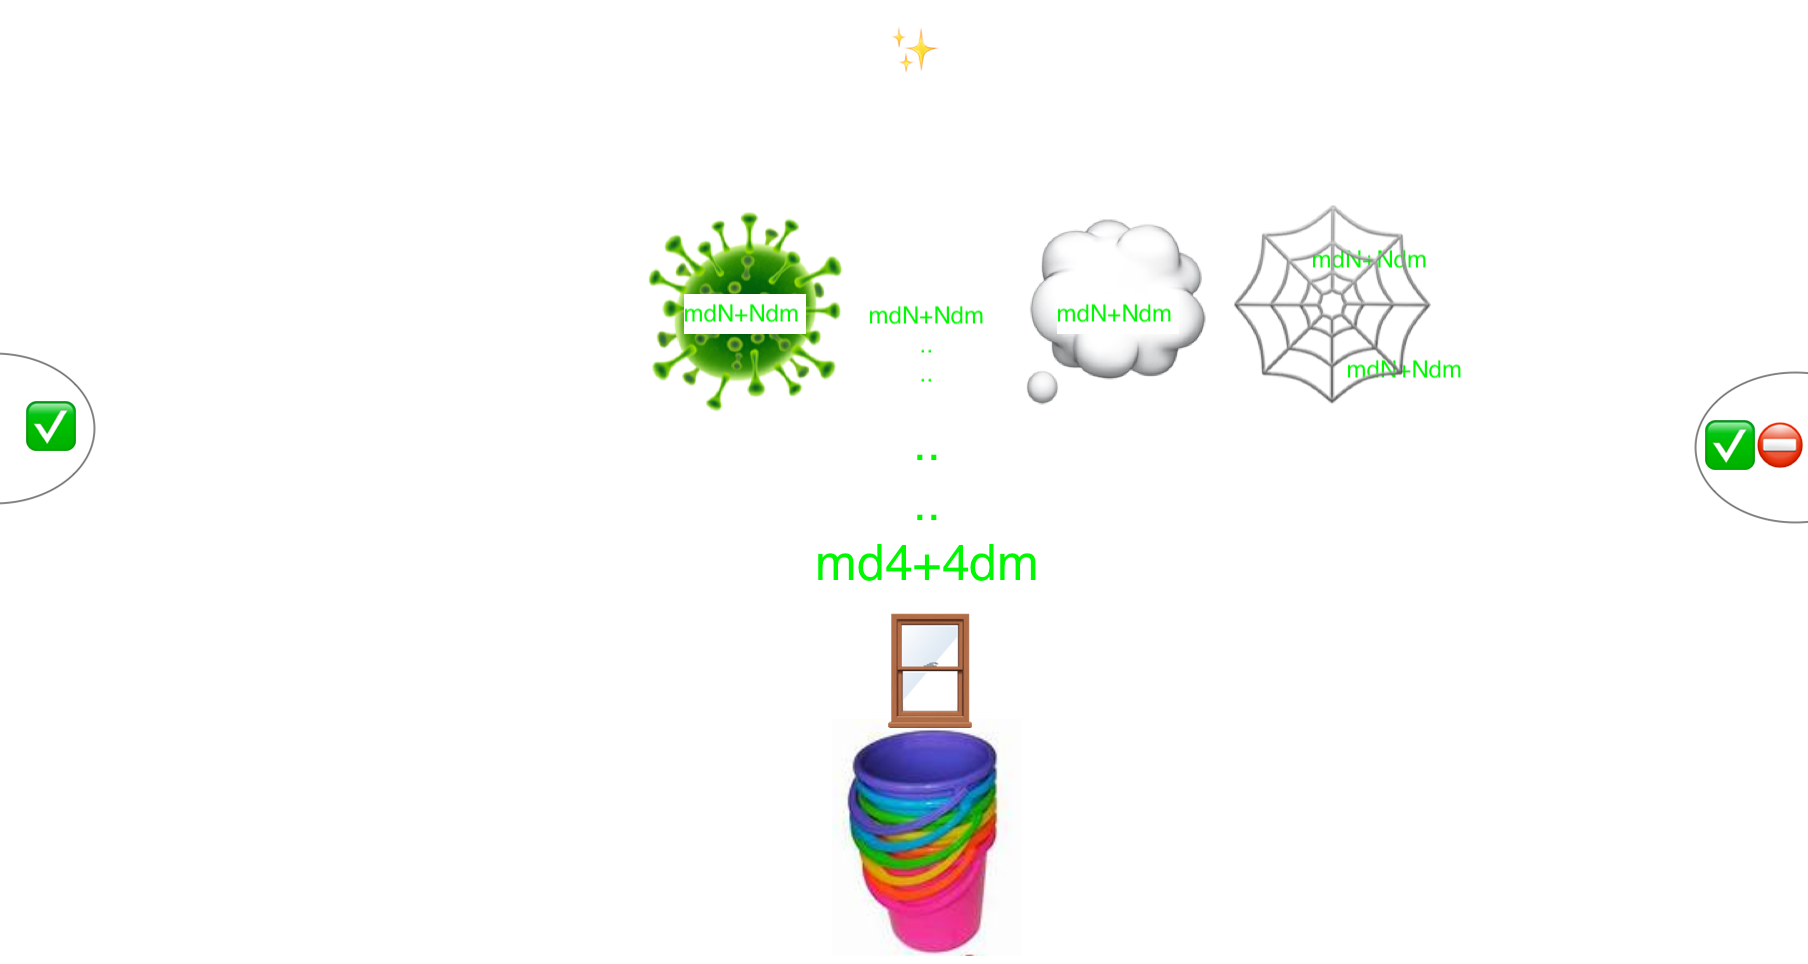 mdnplusndm version 4 with representations of informational web